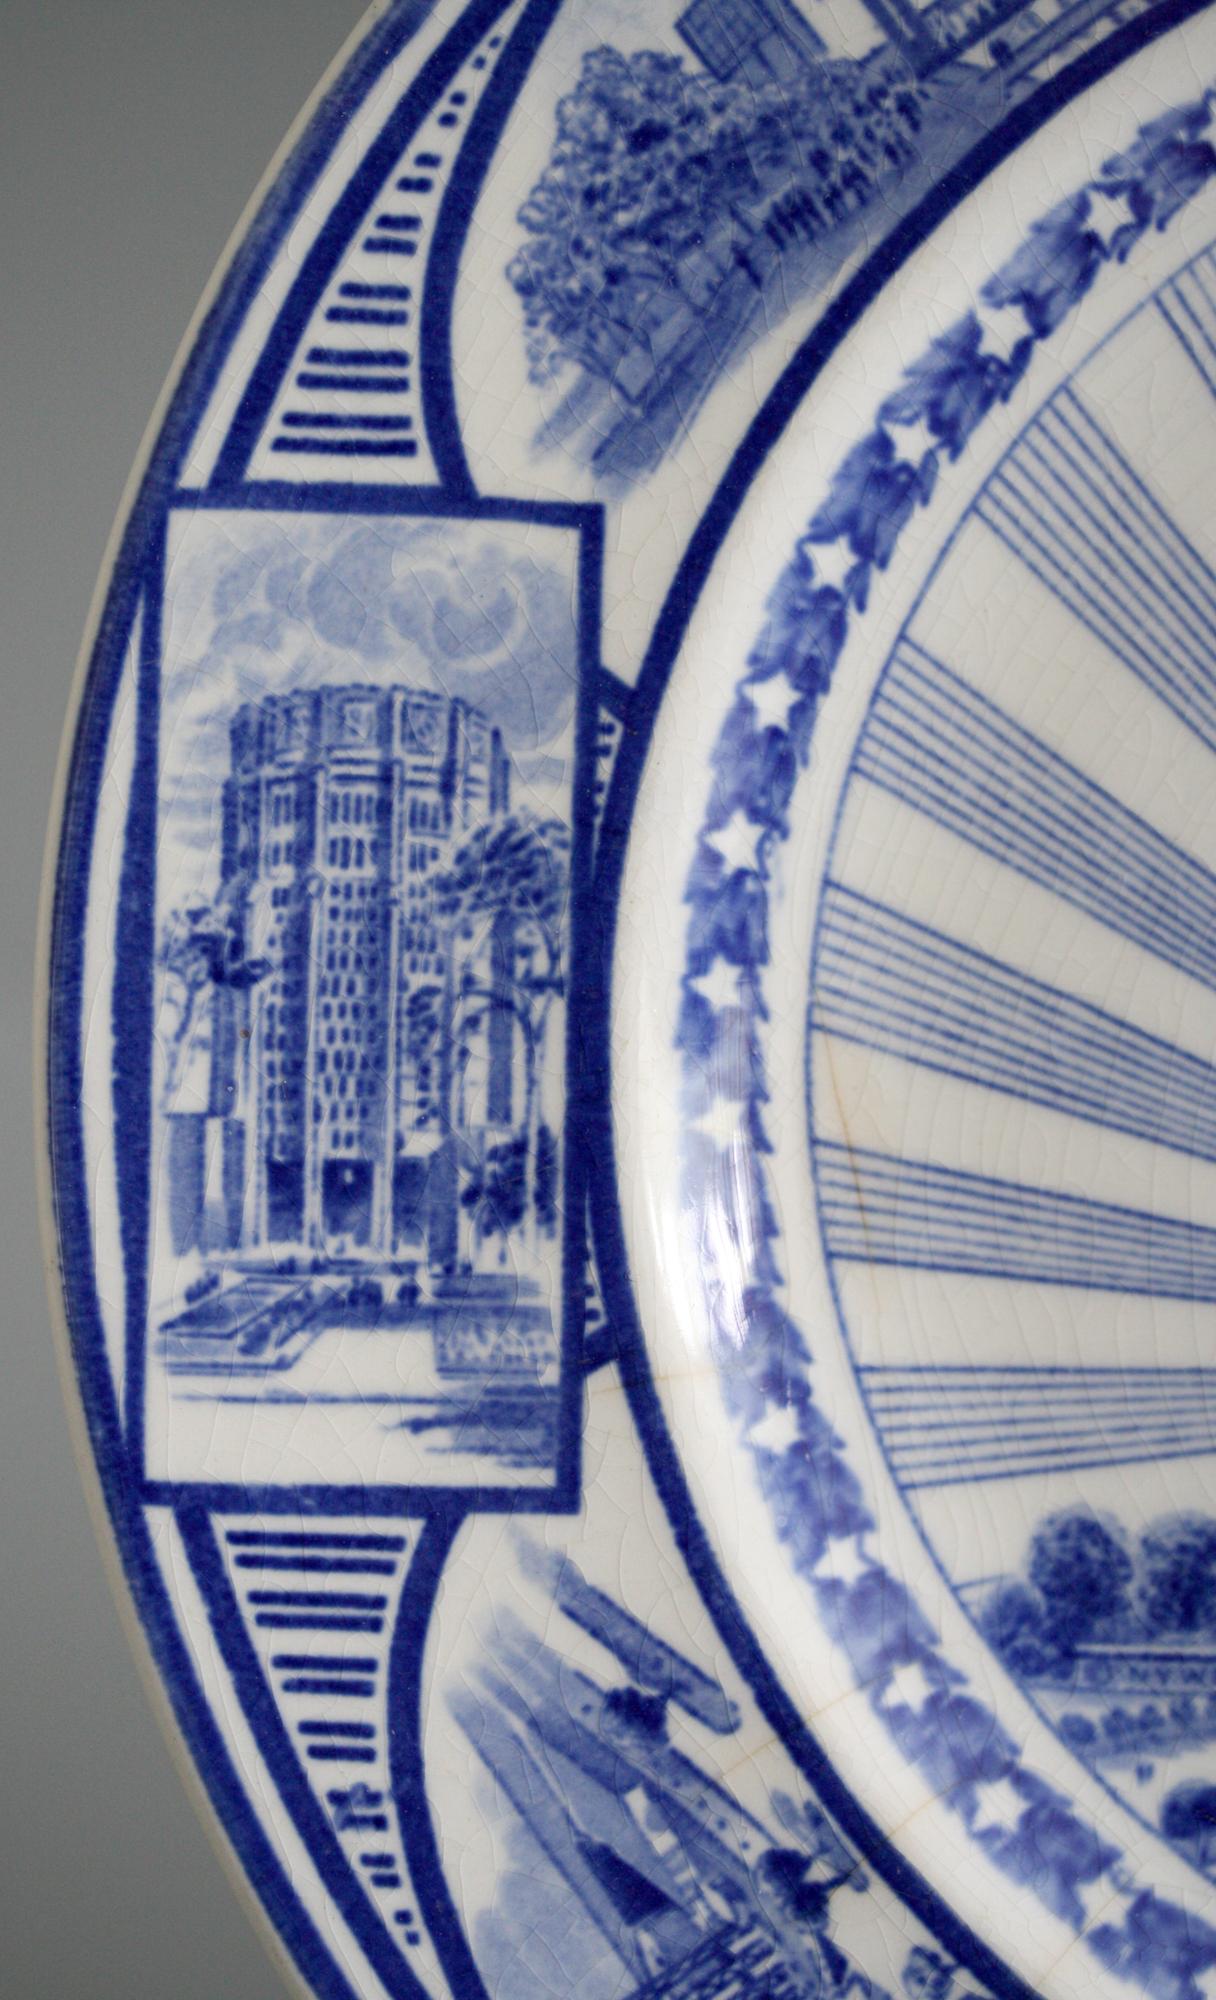 A fine English J & G Meakin commemorative pottery plate made for the New York Worlds Fair, 1789 - 1939. The plate is transfer printed in blue on a white ground and has panels containing pavilions representing various of the participating countries